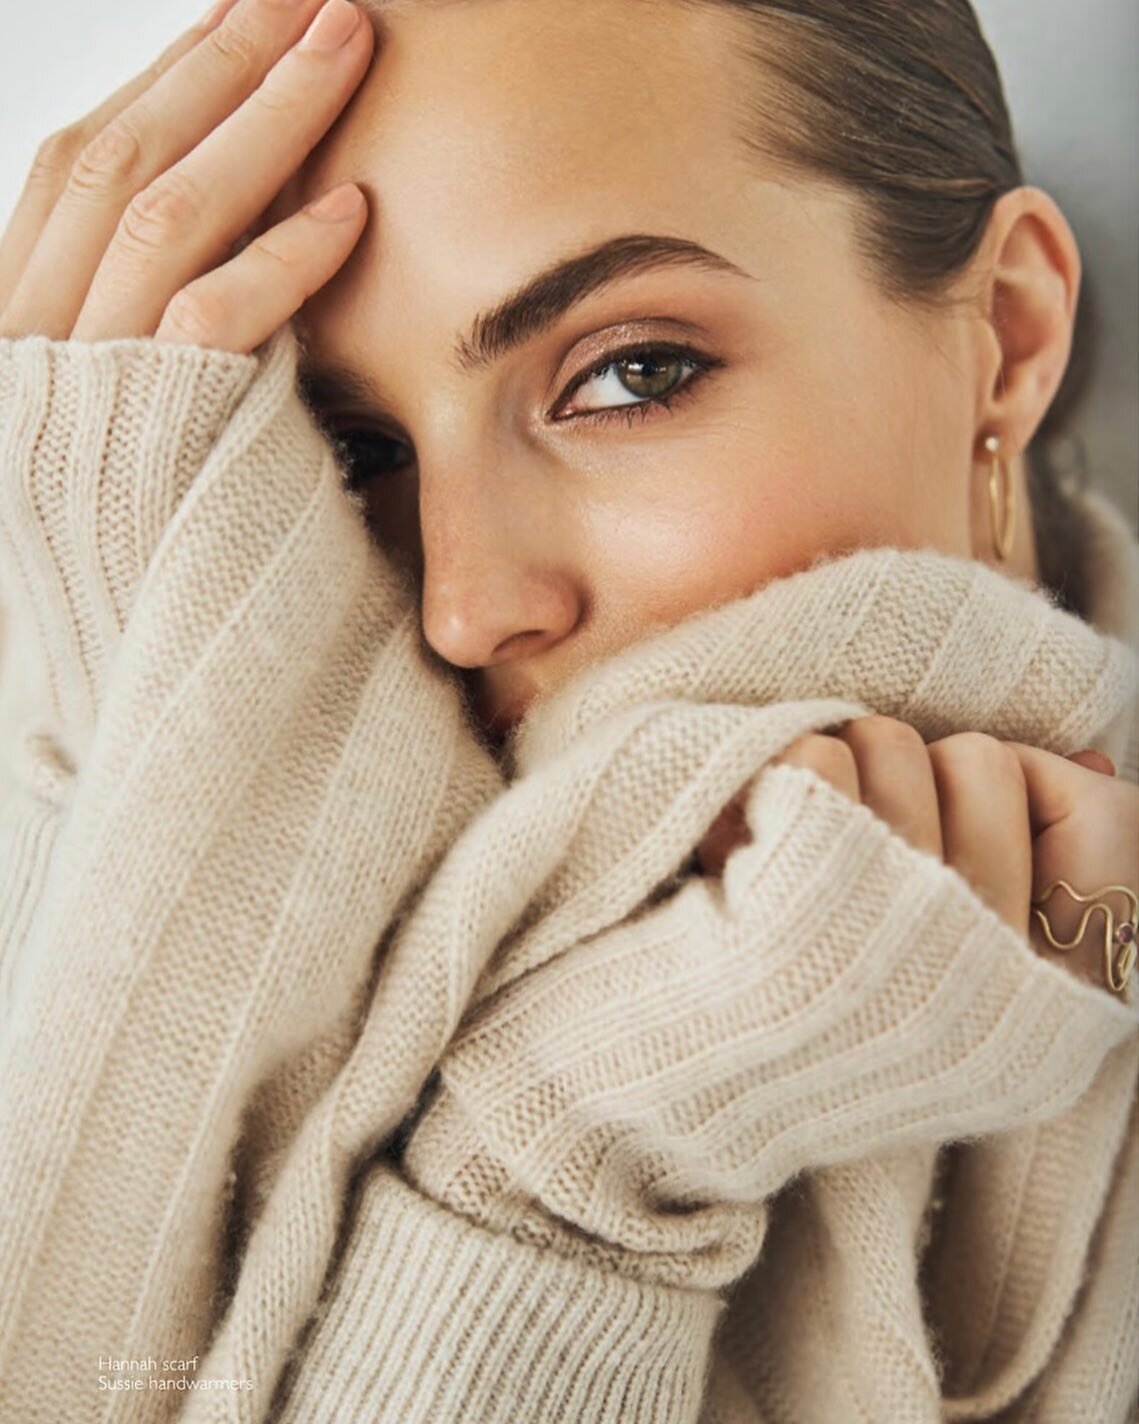 Sweater weather is coming.#beggcashmere